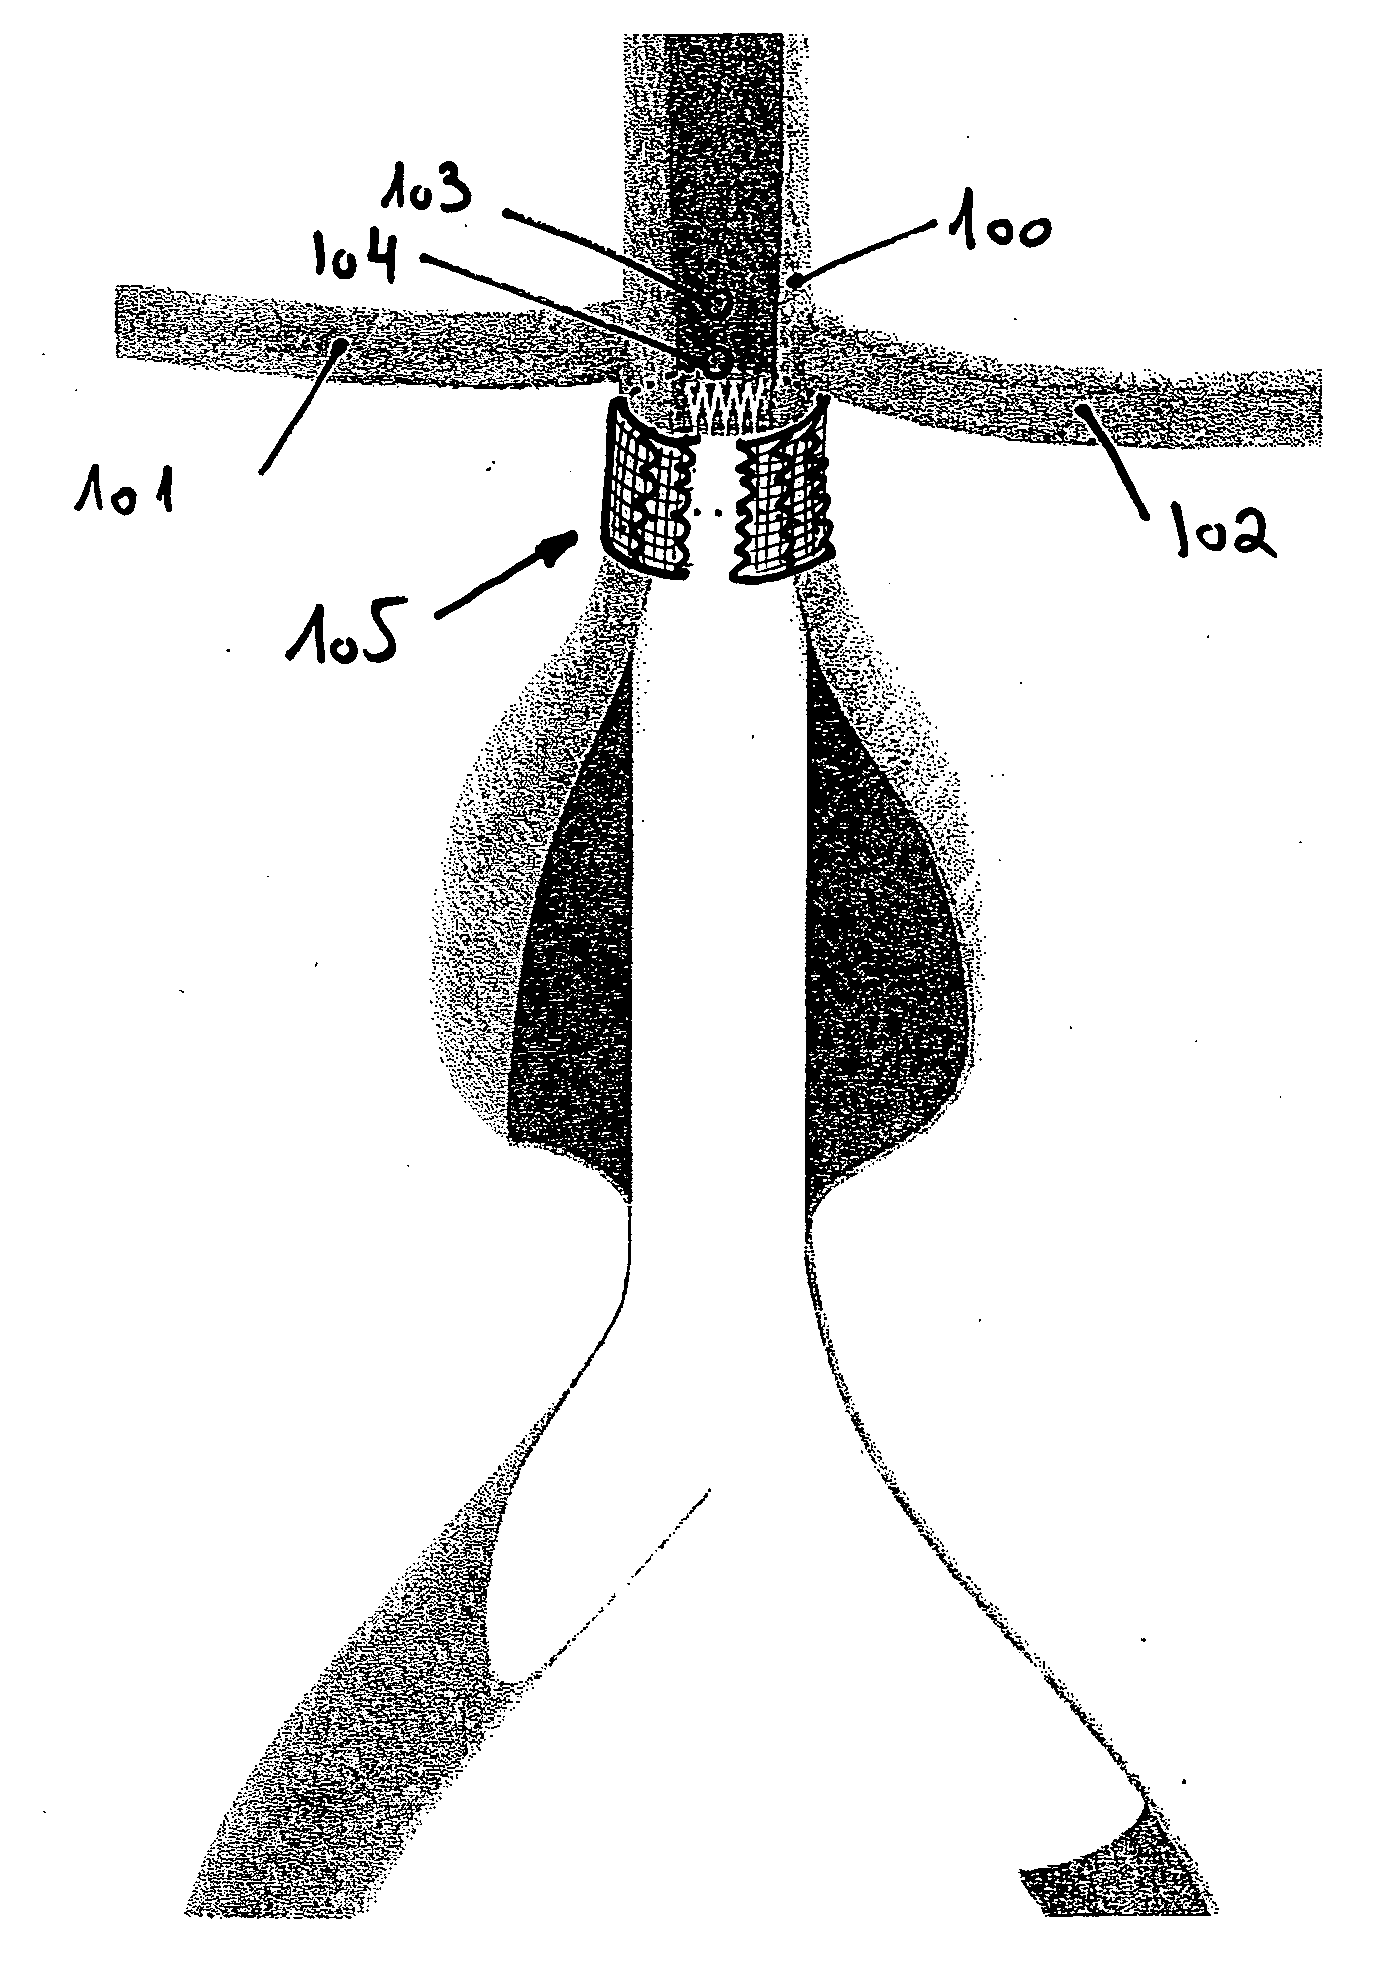 Extra-Vascular Wrapping for Treating Aneurysmatic Aorta in Conjunction with Endovascular Stent-Graft and Methods Thereof